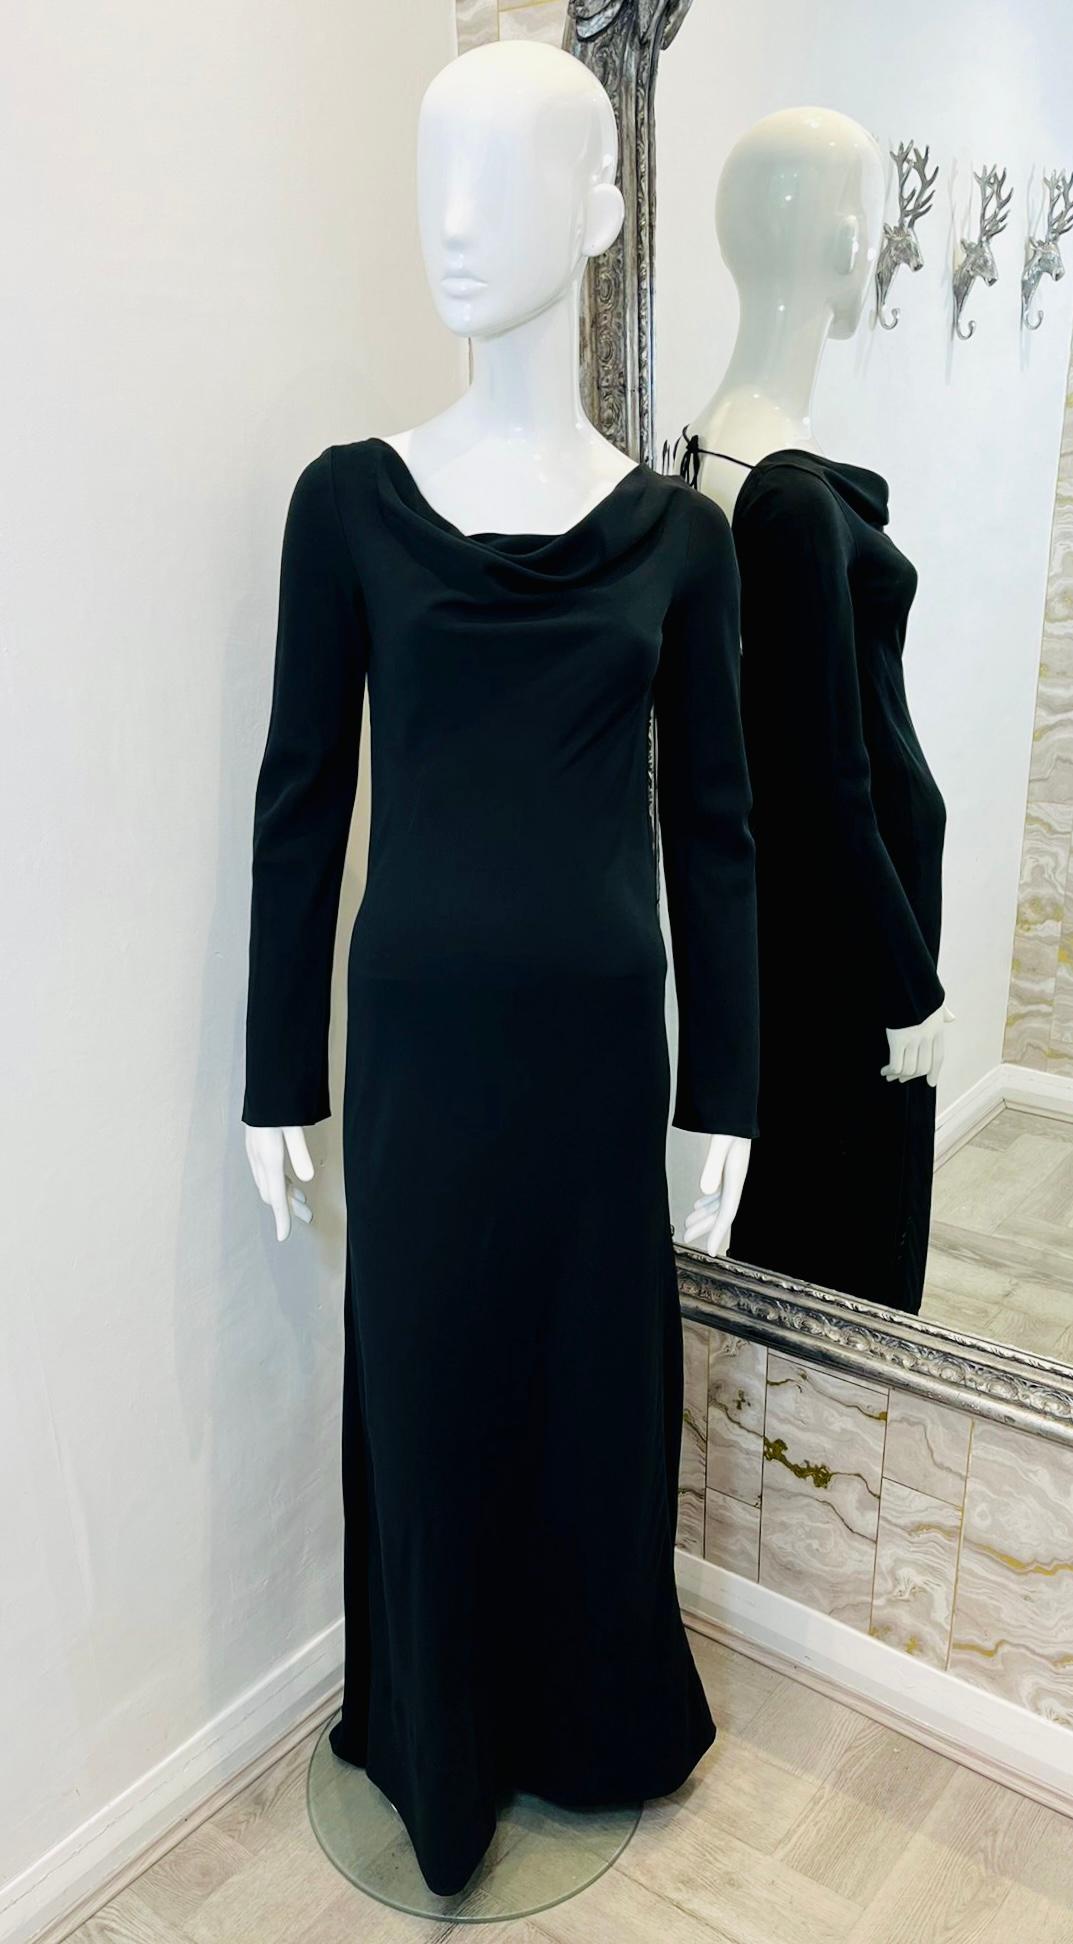 Jenny Packham Fishtail Gown

Black, evening dress designed with cowl neckline and long sleeves.

Styled with open back and tie-up detailing to rear.

Featuring bodycon silhouette and fishtail skirt.

Size – S (Label missing but